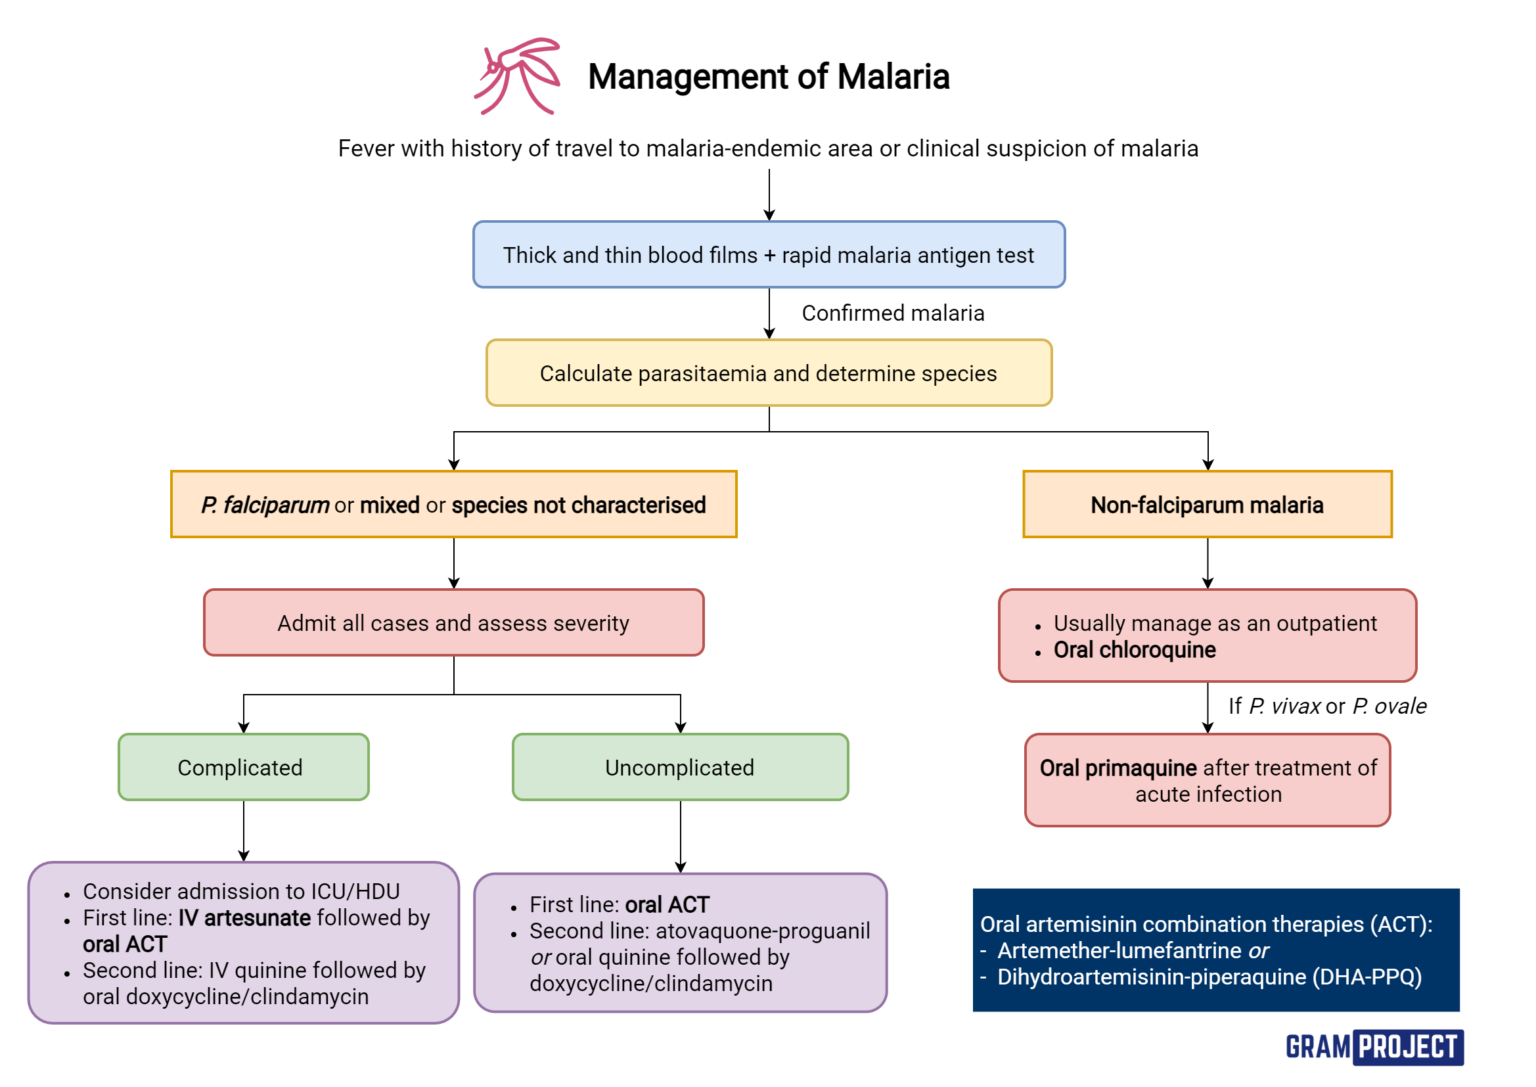 Flowchart guide to management of malaria